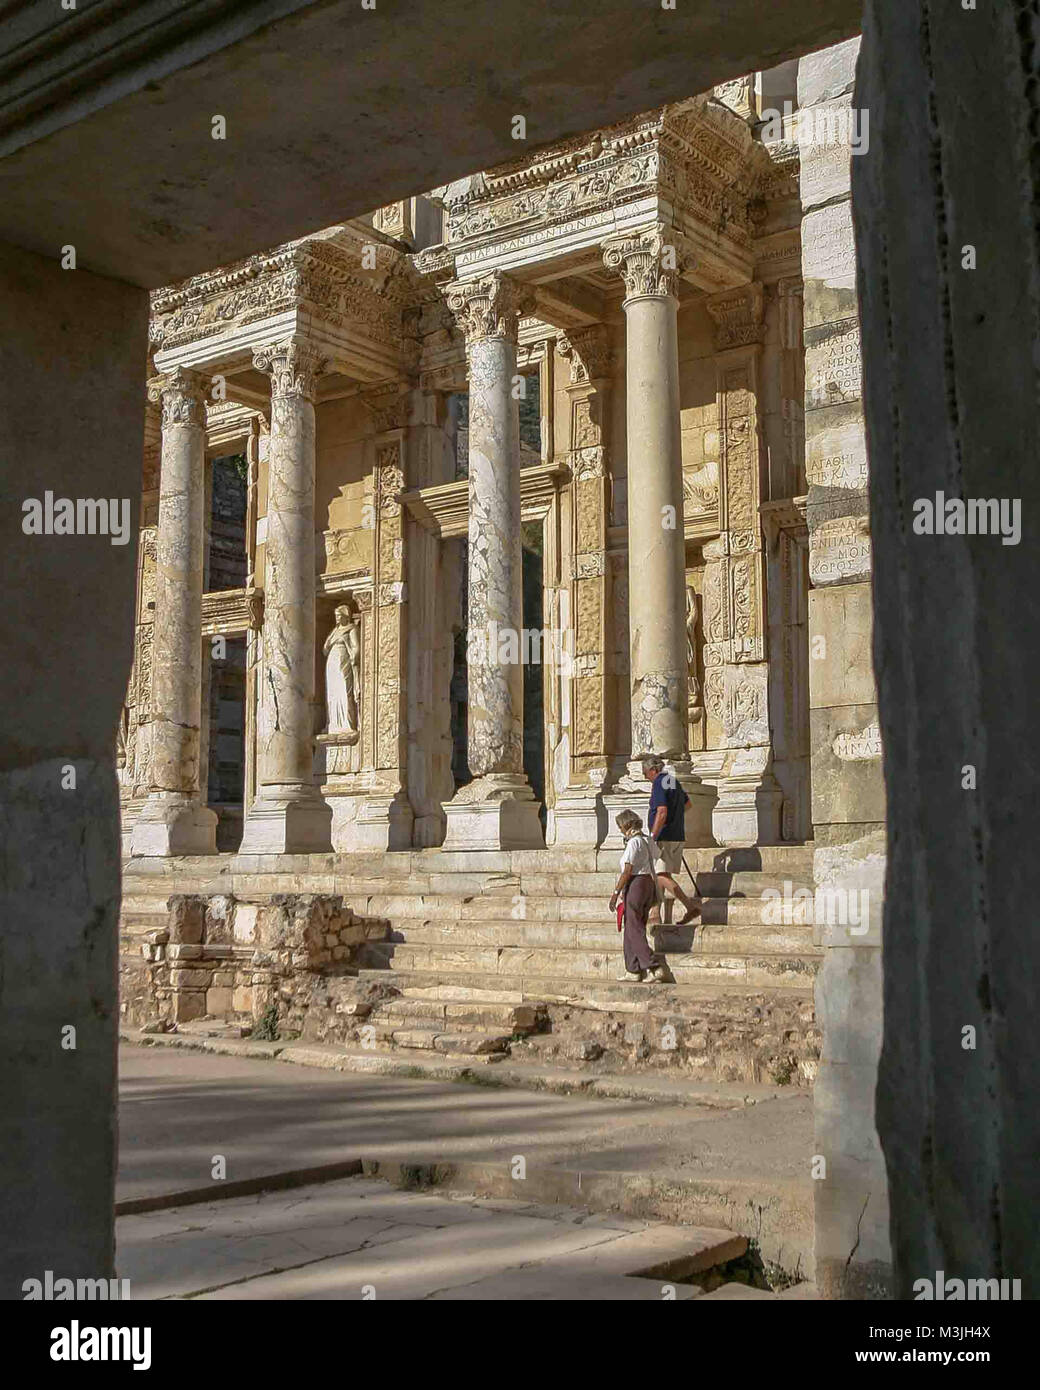 Ephesus, Izmir, Turkey. 1st Oct, 2004. A tourist couple descend the steps of the Library of Celsus, a tomb for the Roman governor of the province of Asia. Built in 117 A.D. it is one of the most beautiful and most photographed structures in Ephesus. An ancient Greek city on the Ionian coast, dating to the 10th century BC, Ephesus was a religious, cultural and commercial center noted for its temples and architecture. Its ruins are now a favorite international tourist attraction and a UNESCO World Heritage Site. Credit: Arnold Drapkin/ZUMA Wire/Alamy Live News Stock Photo